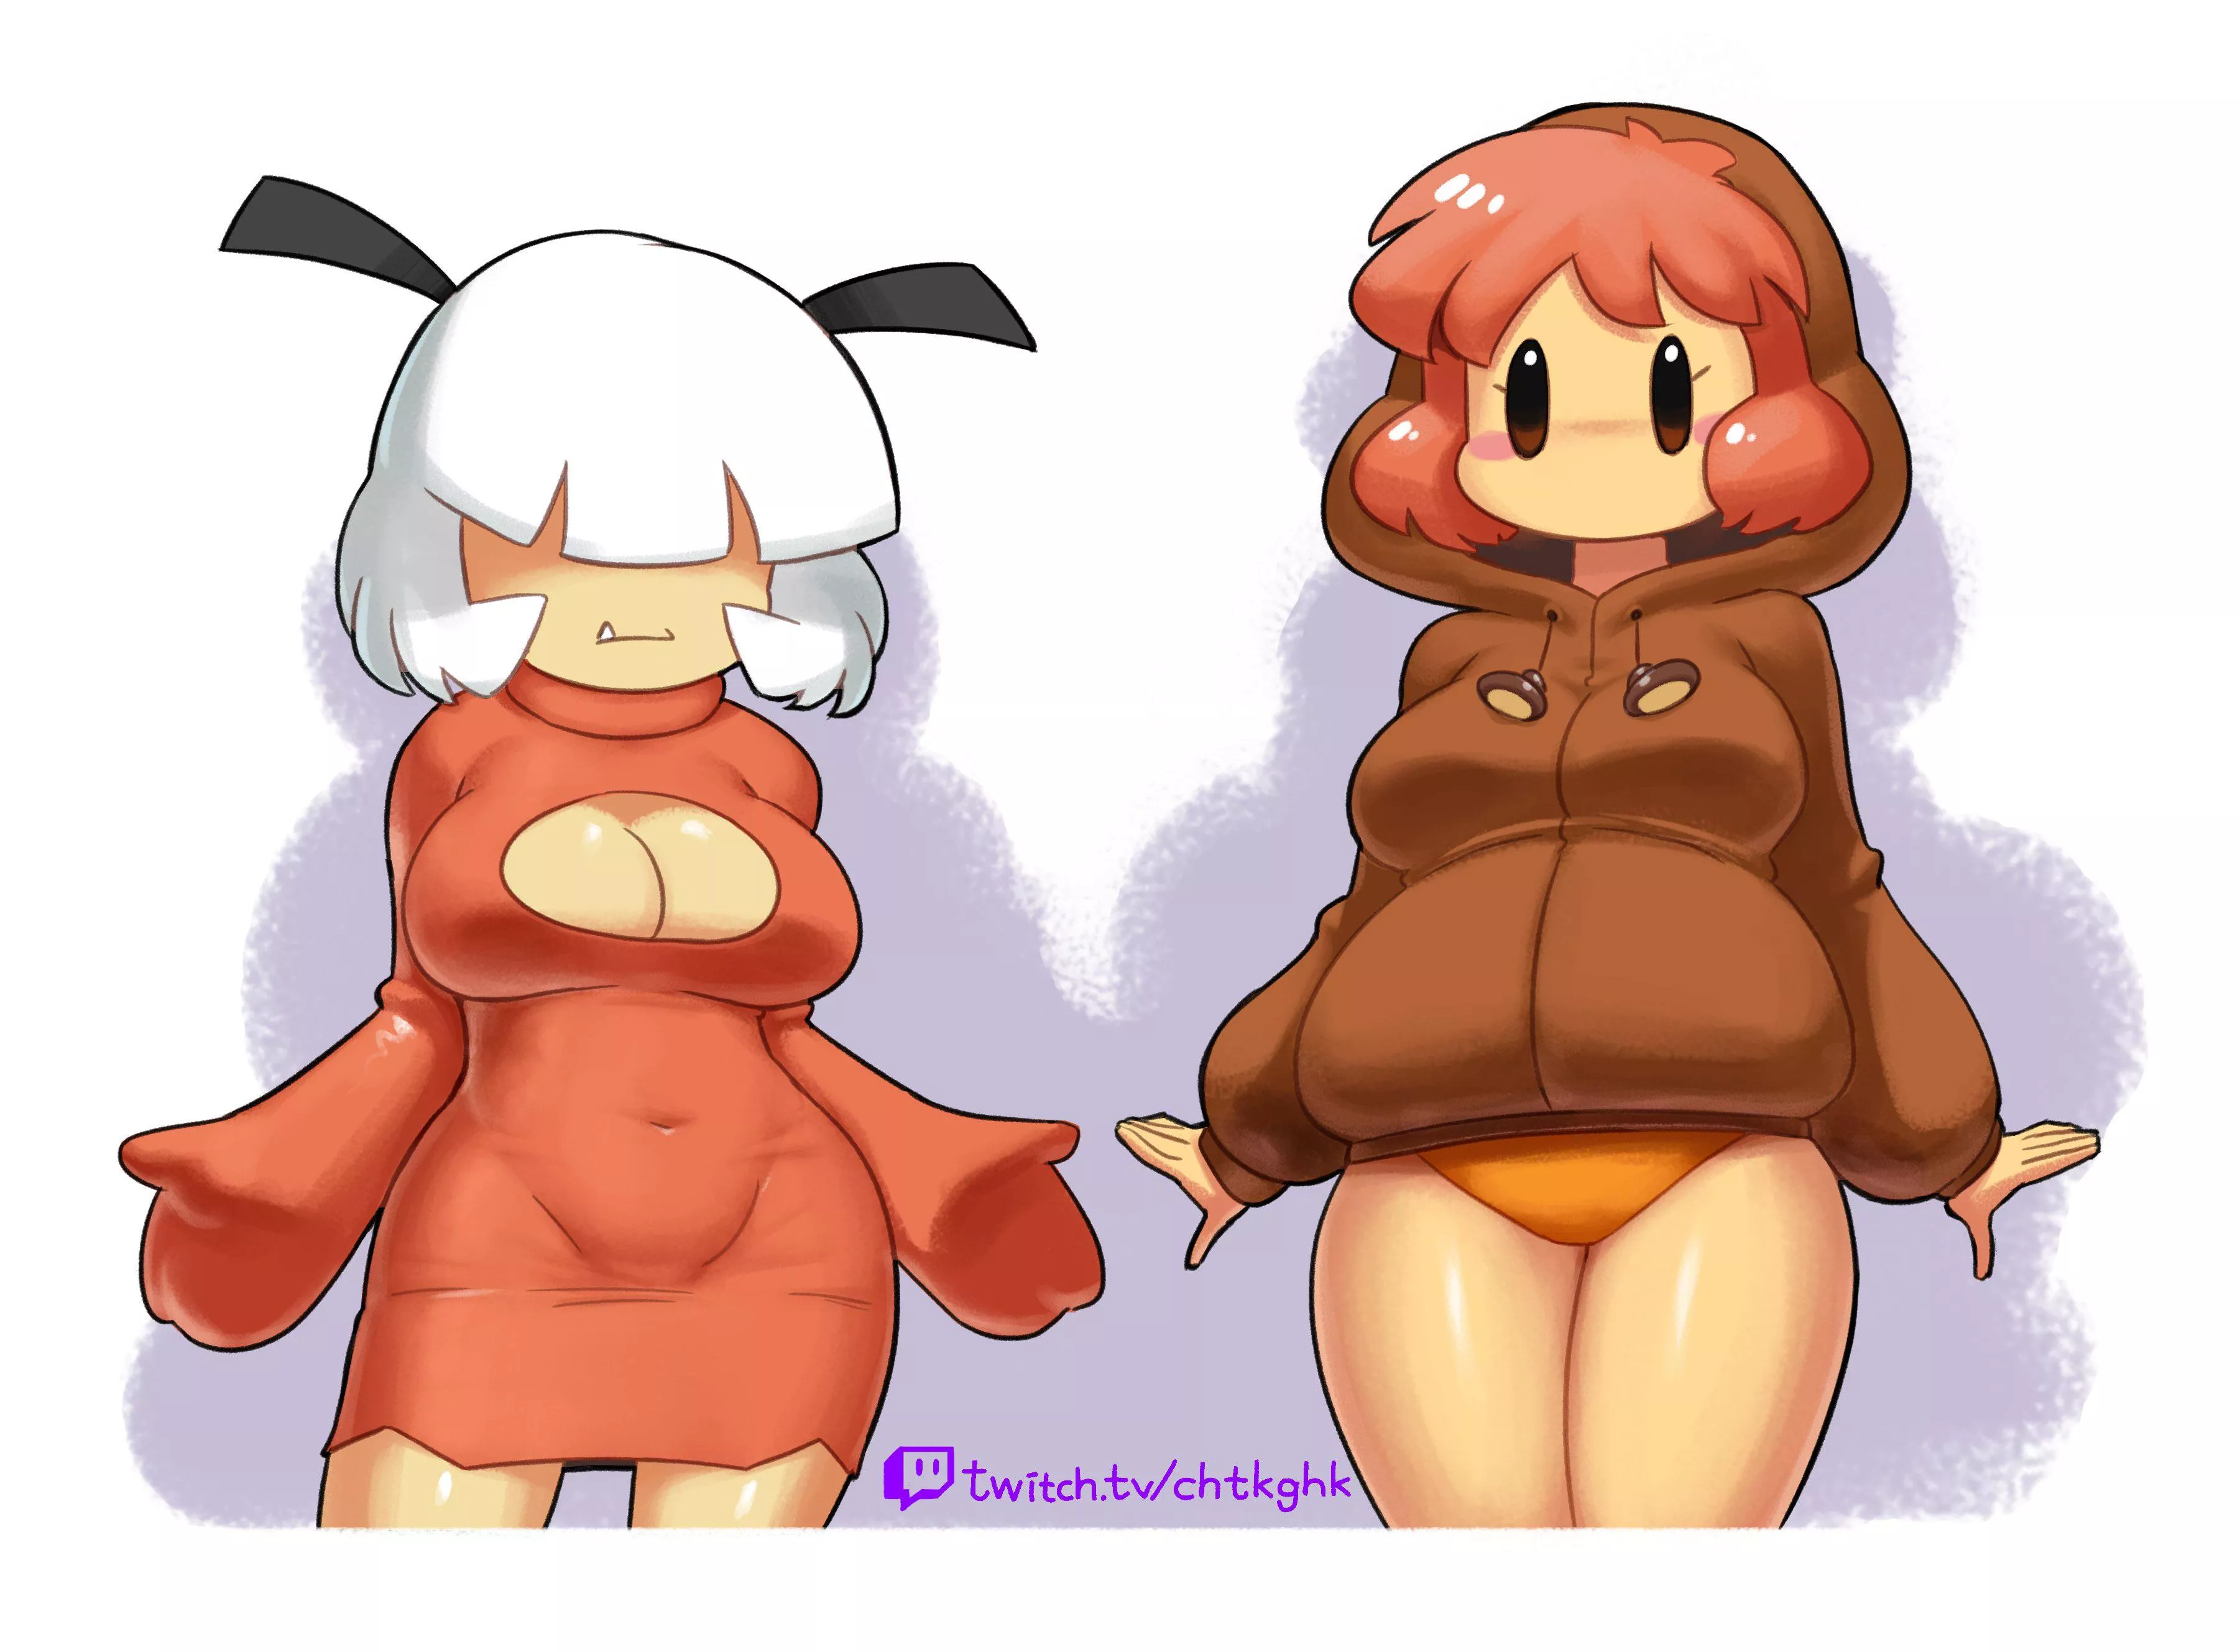 Goomba Girl Porn - Goomba gal and Waddle Dee clothes swap nudes by LimboFall